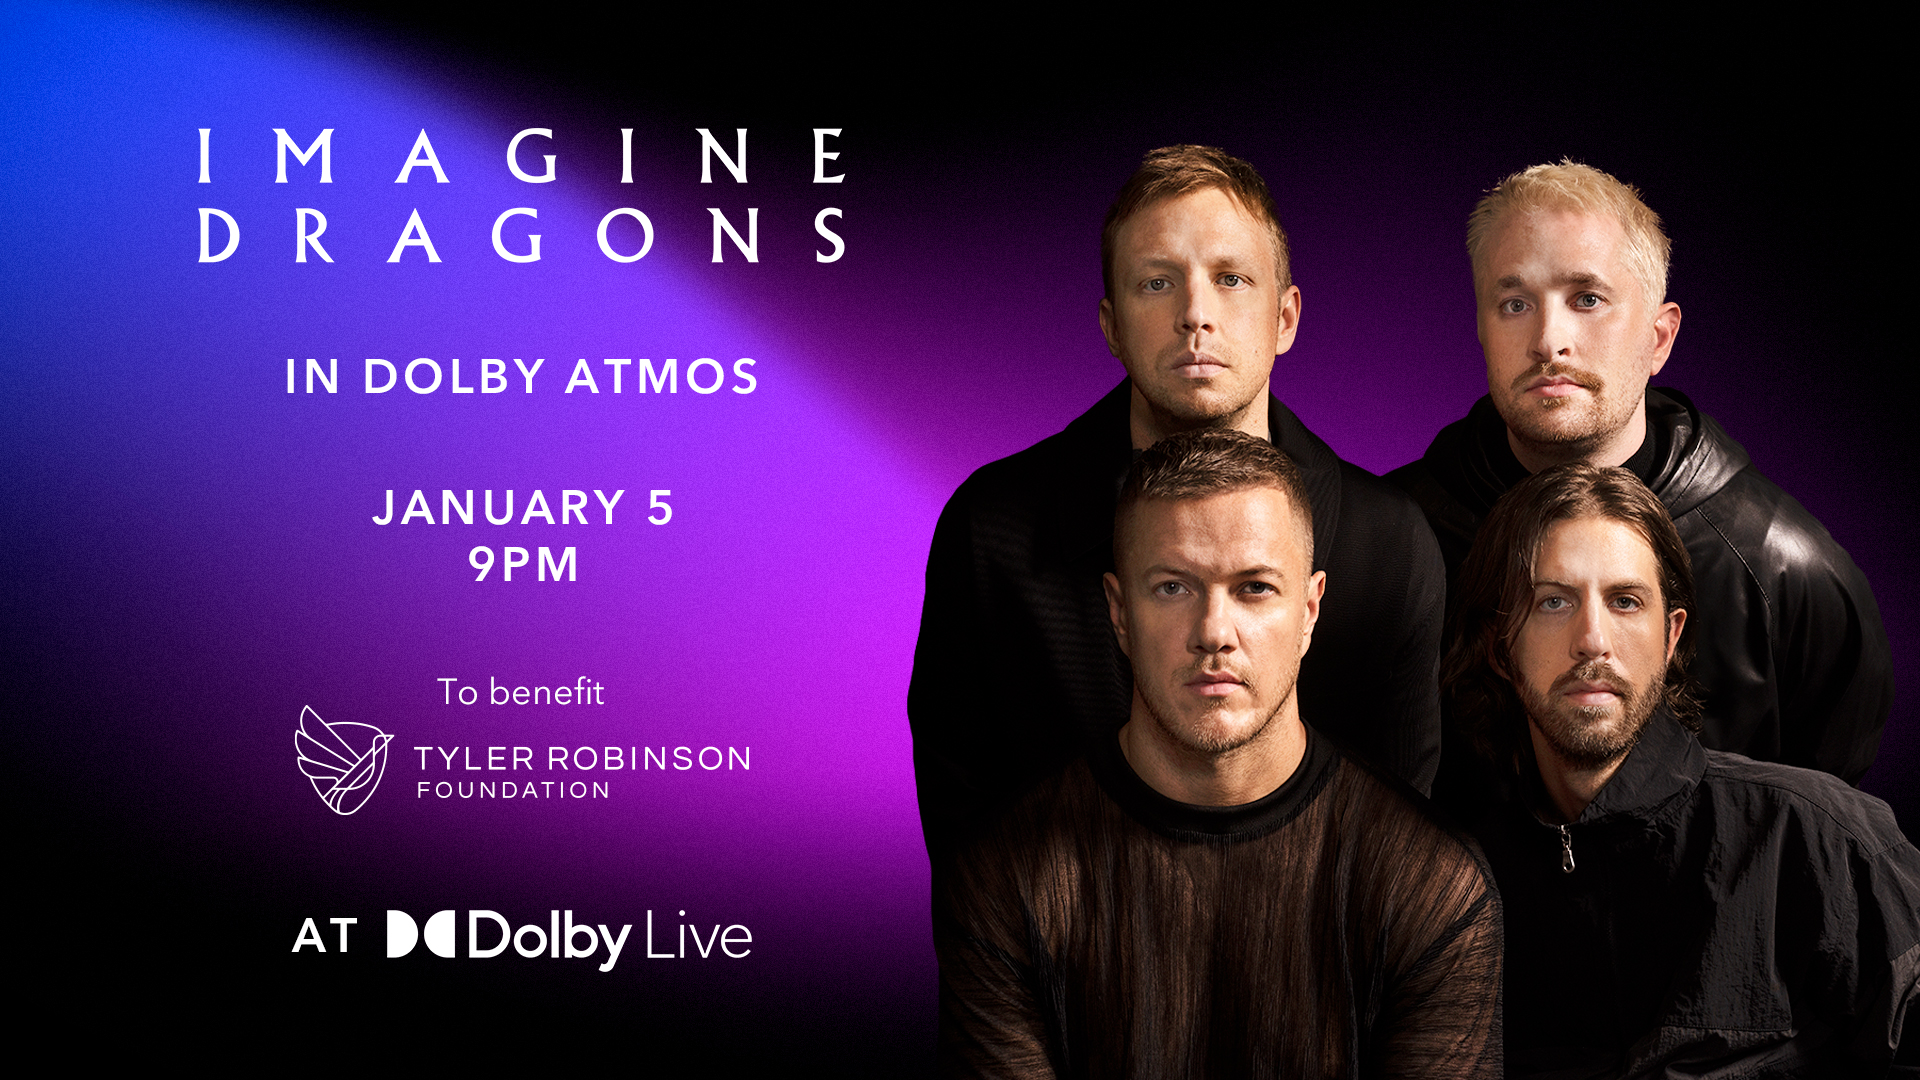 Imagine Dragons and Dolby to Kick Off CES with a Special Live Concert in Dolby Atmos at Dolby Live at Park MGM